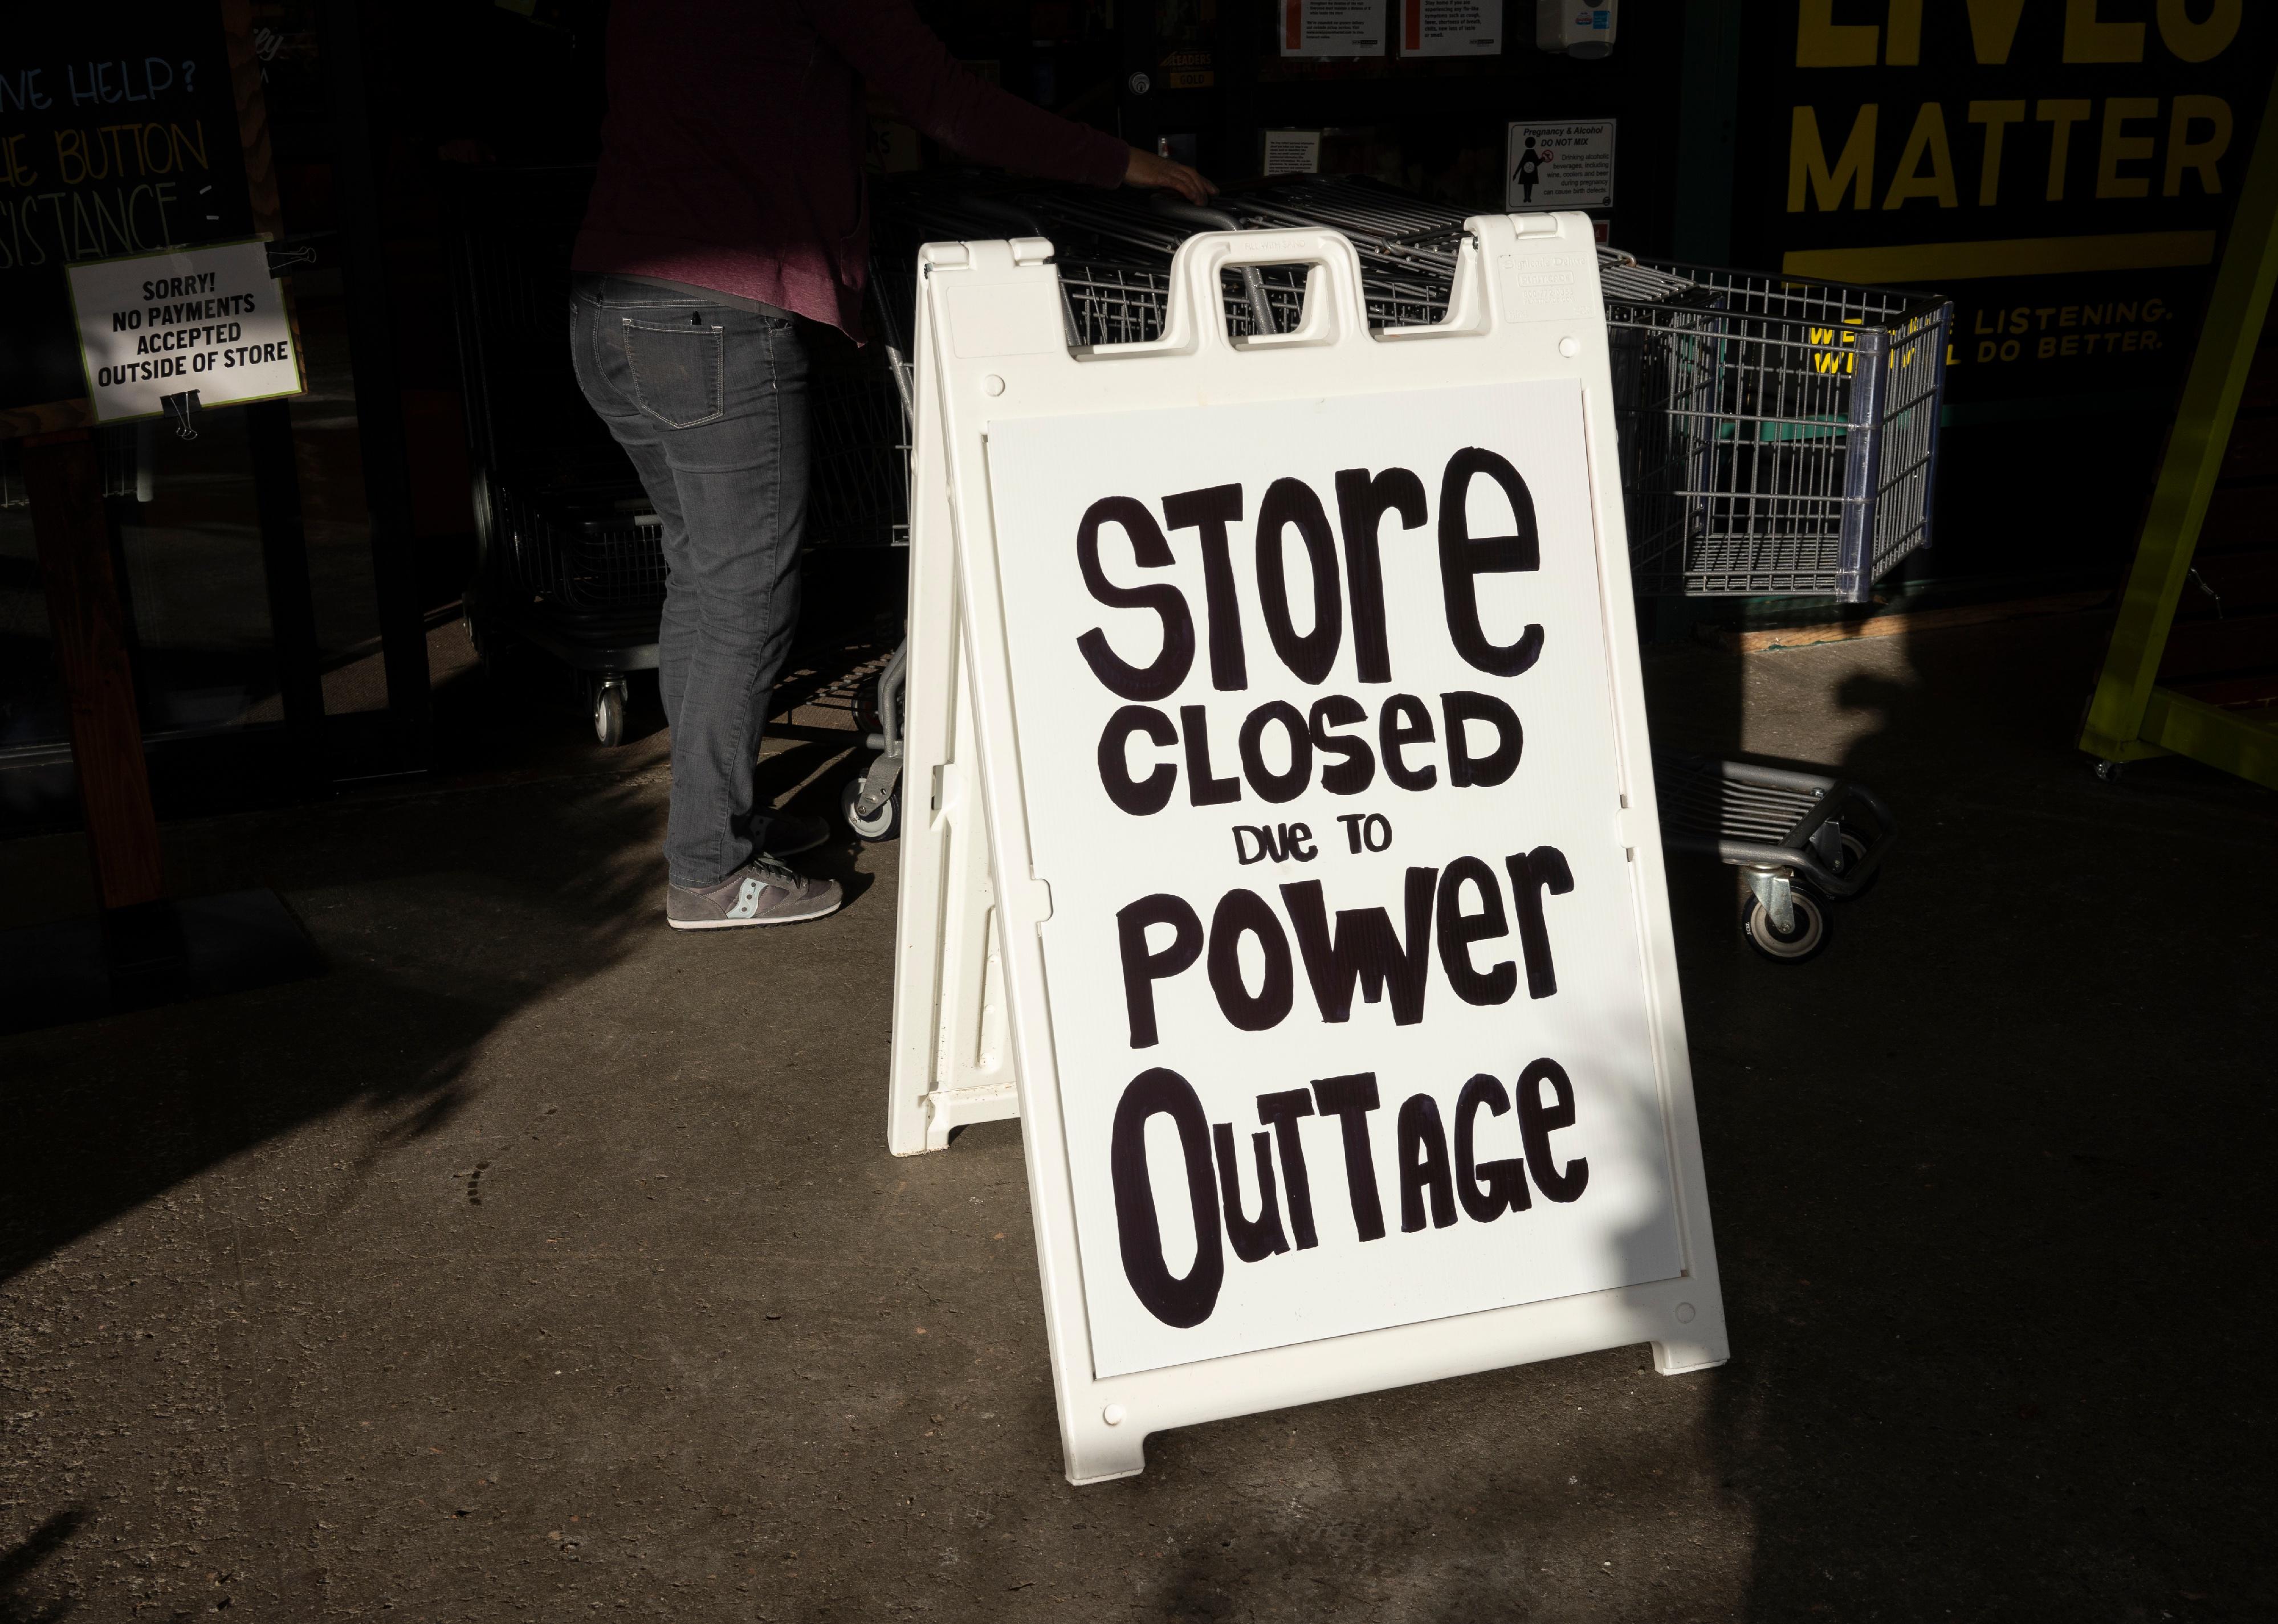 Store Closed due to Power Outage signage.